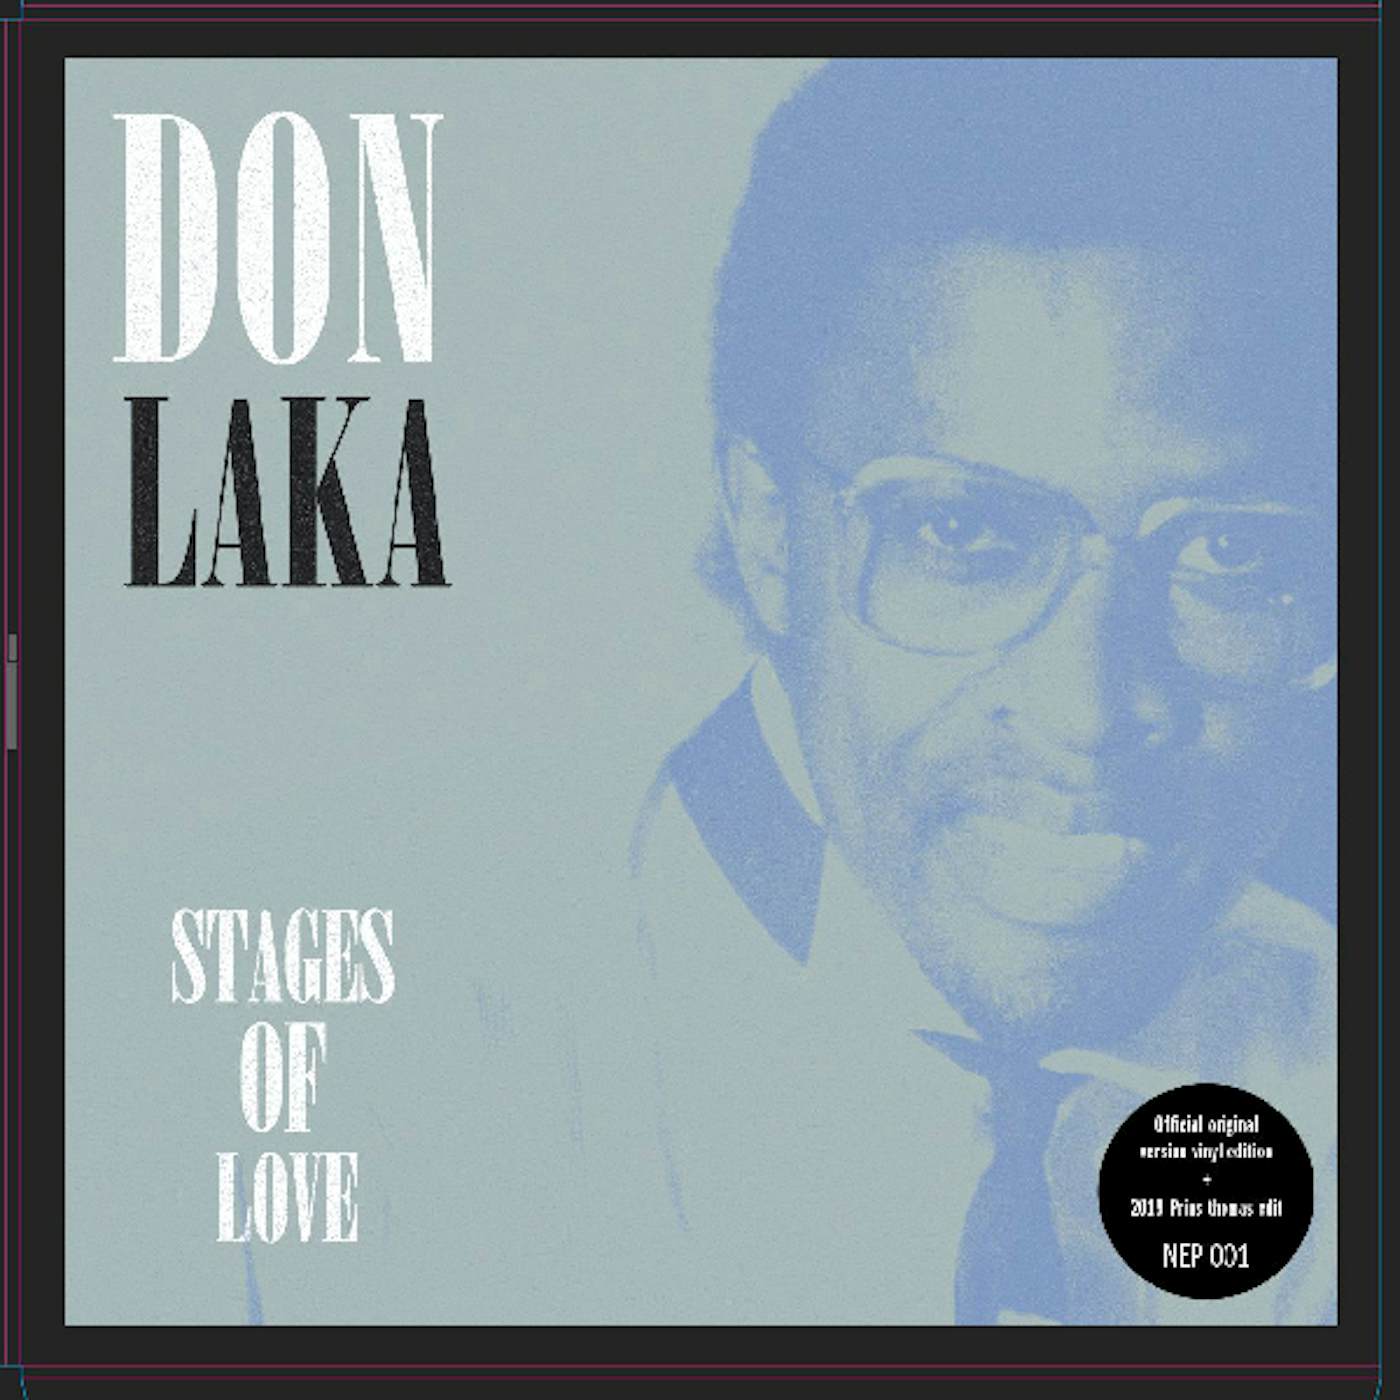 Don Laka Stages of Love Vinyl Record